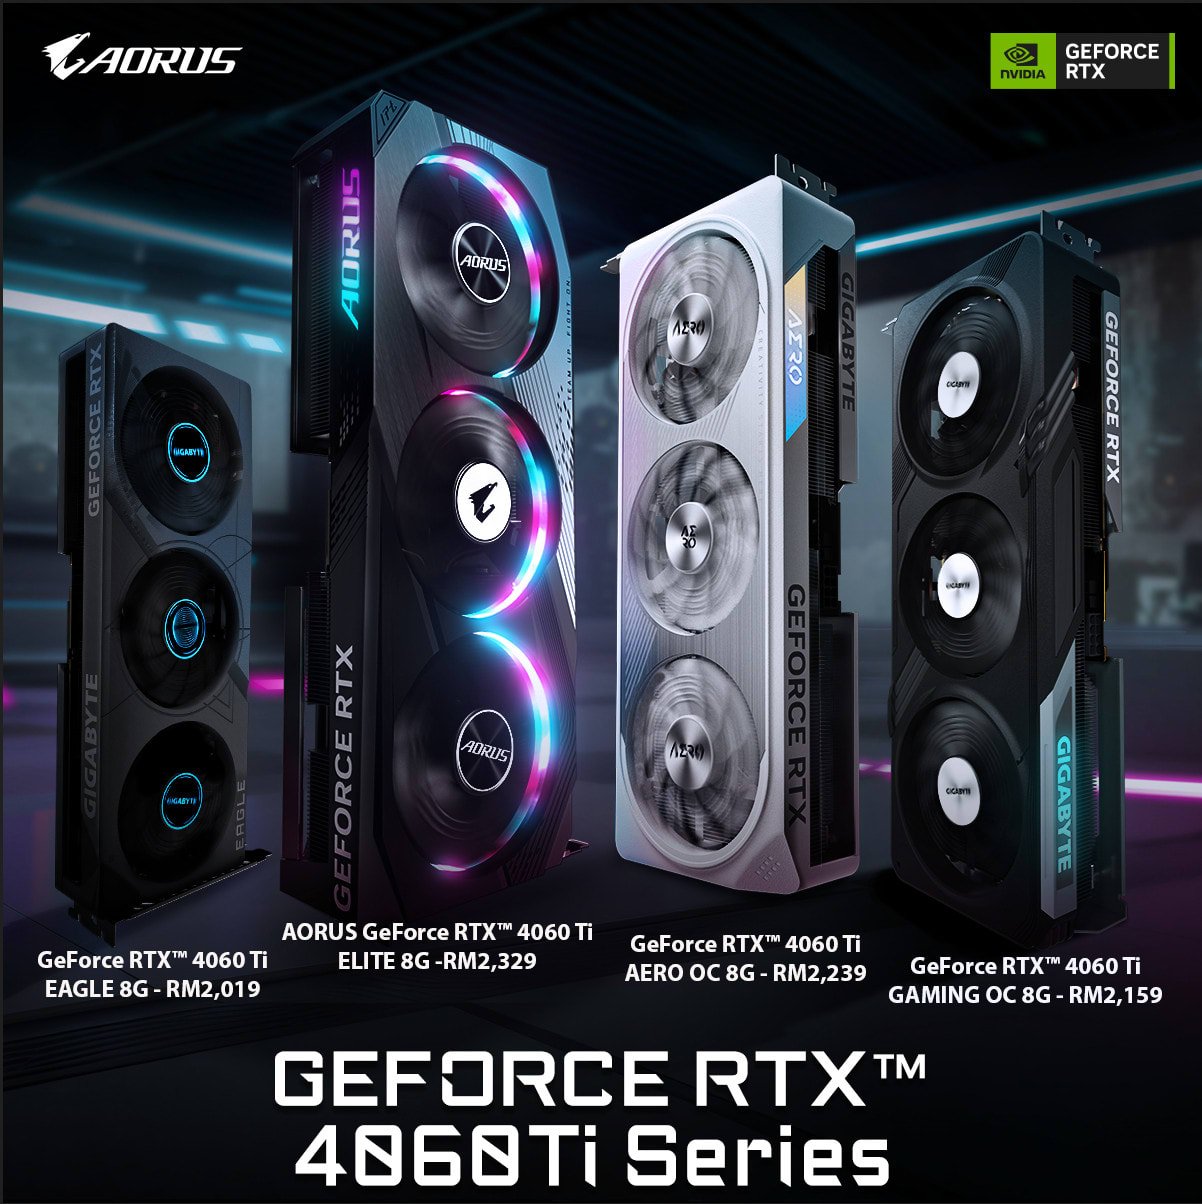 GIGABYTE Launches the GeForce RTX 4060 Ti